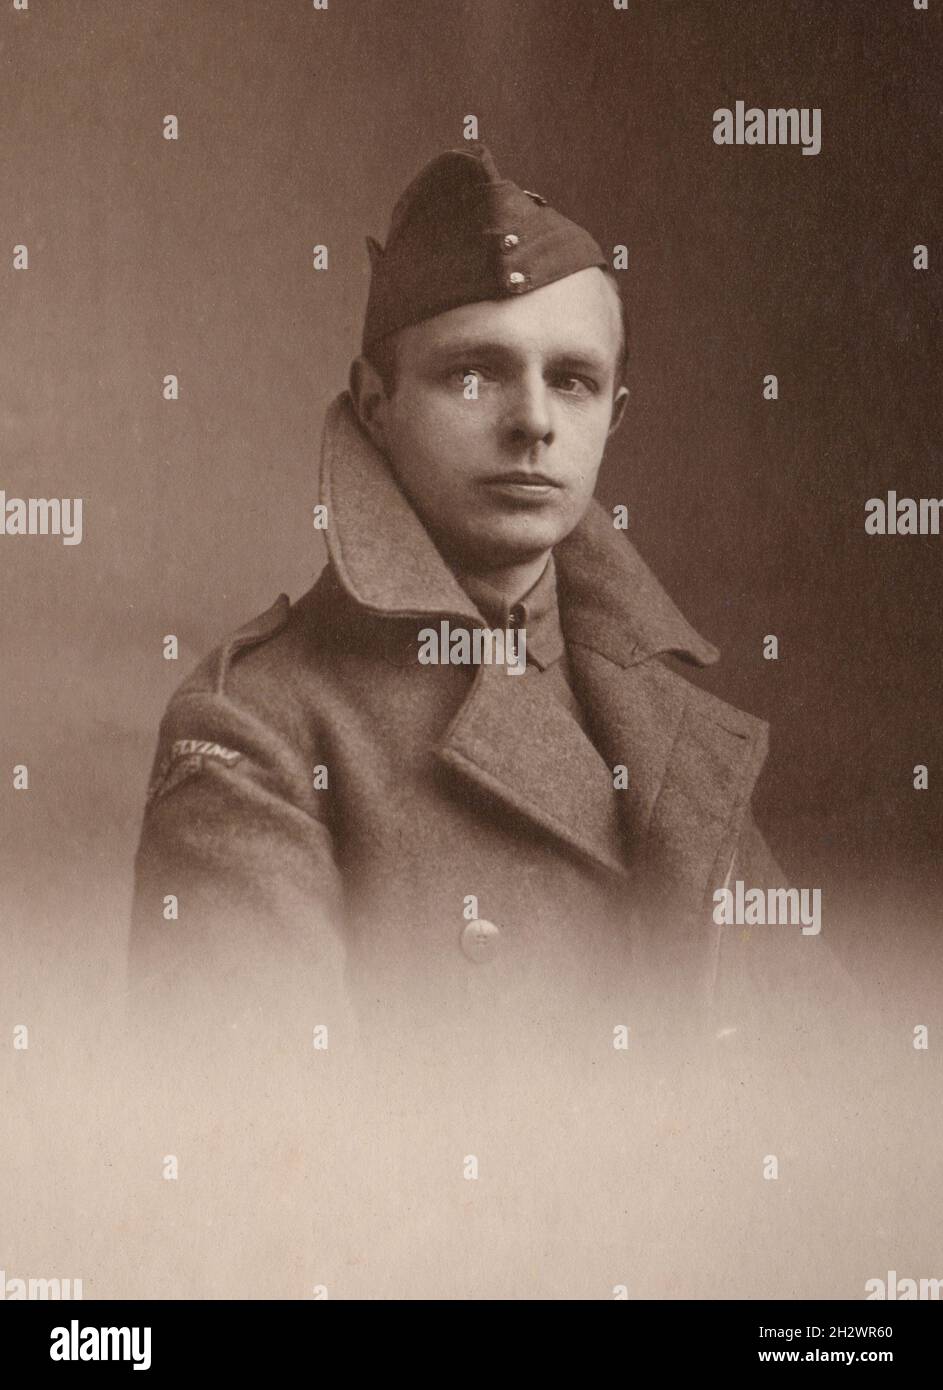 An antique sepia portrait photograph of a First World War Royal Flying Corps serviceman in uniform. He is wearing an RFC side cap and a great coat displaying a ‘Royal Flying Corps’ shoulder title. Stock Photo